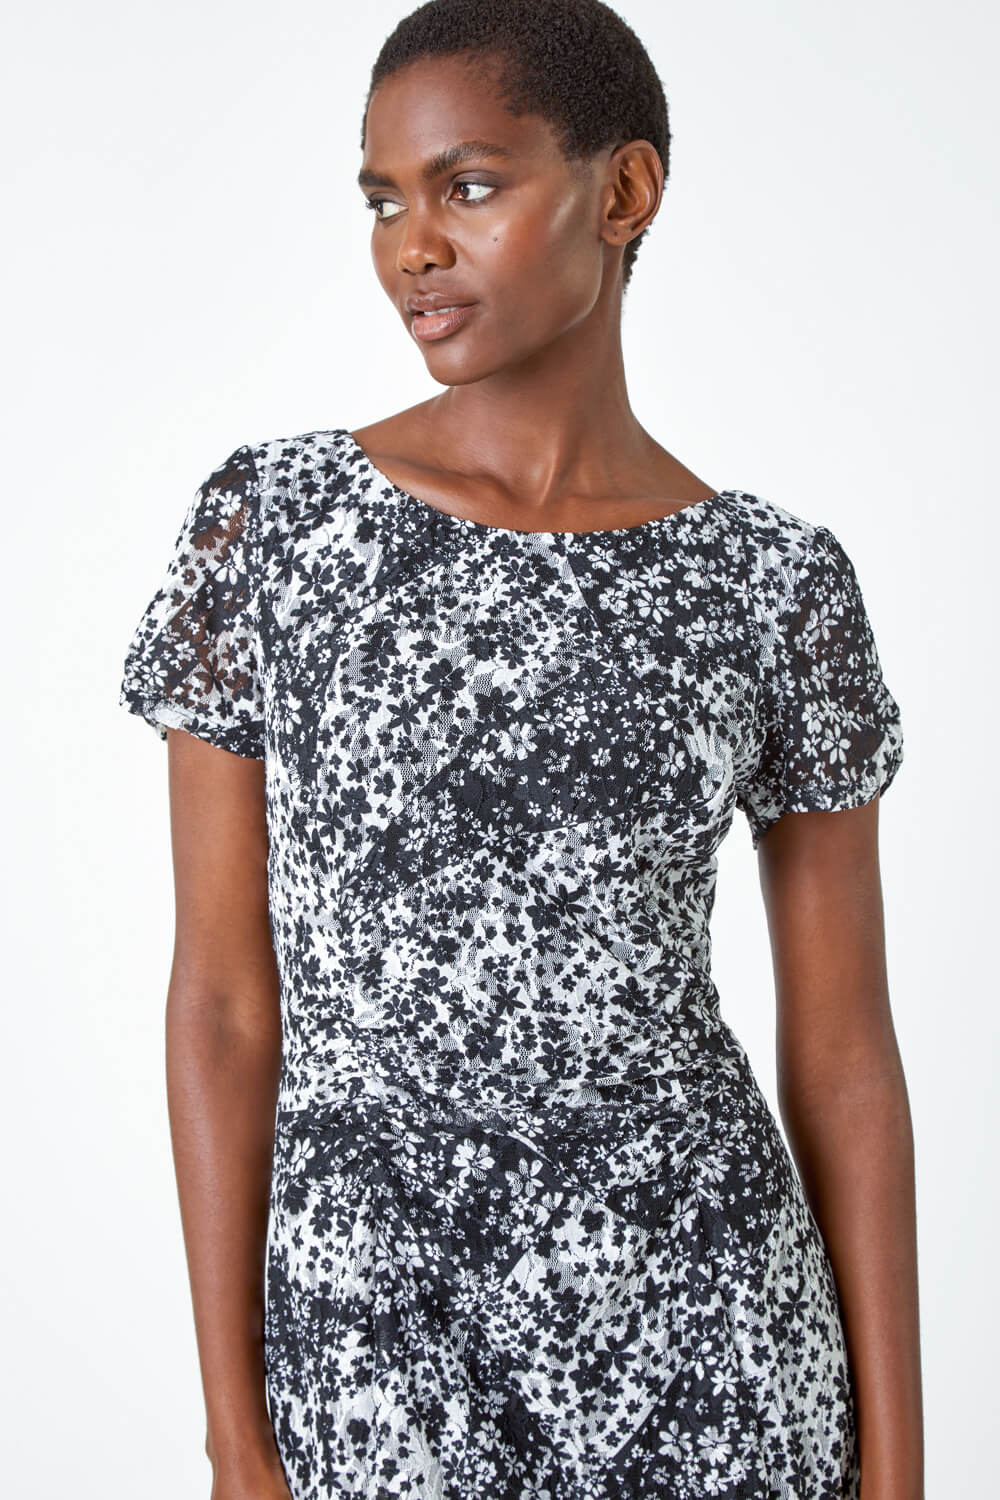 Black Floral Print Lace Stretch Ruched Dress, Image 4 of 5